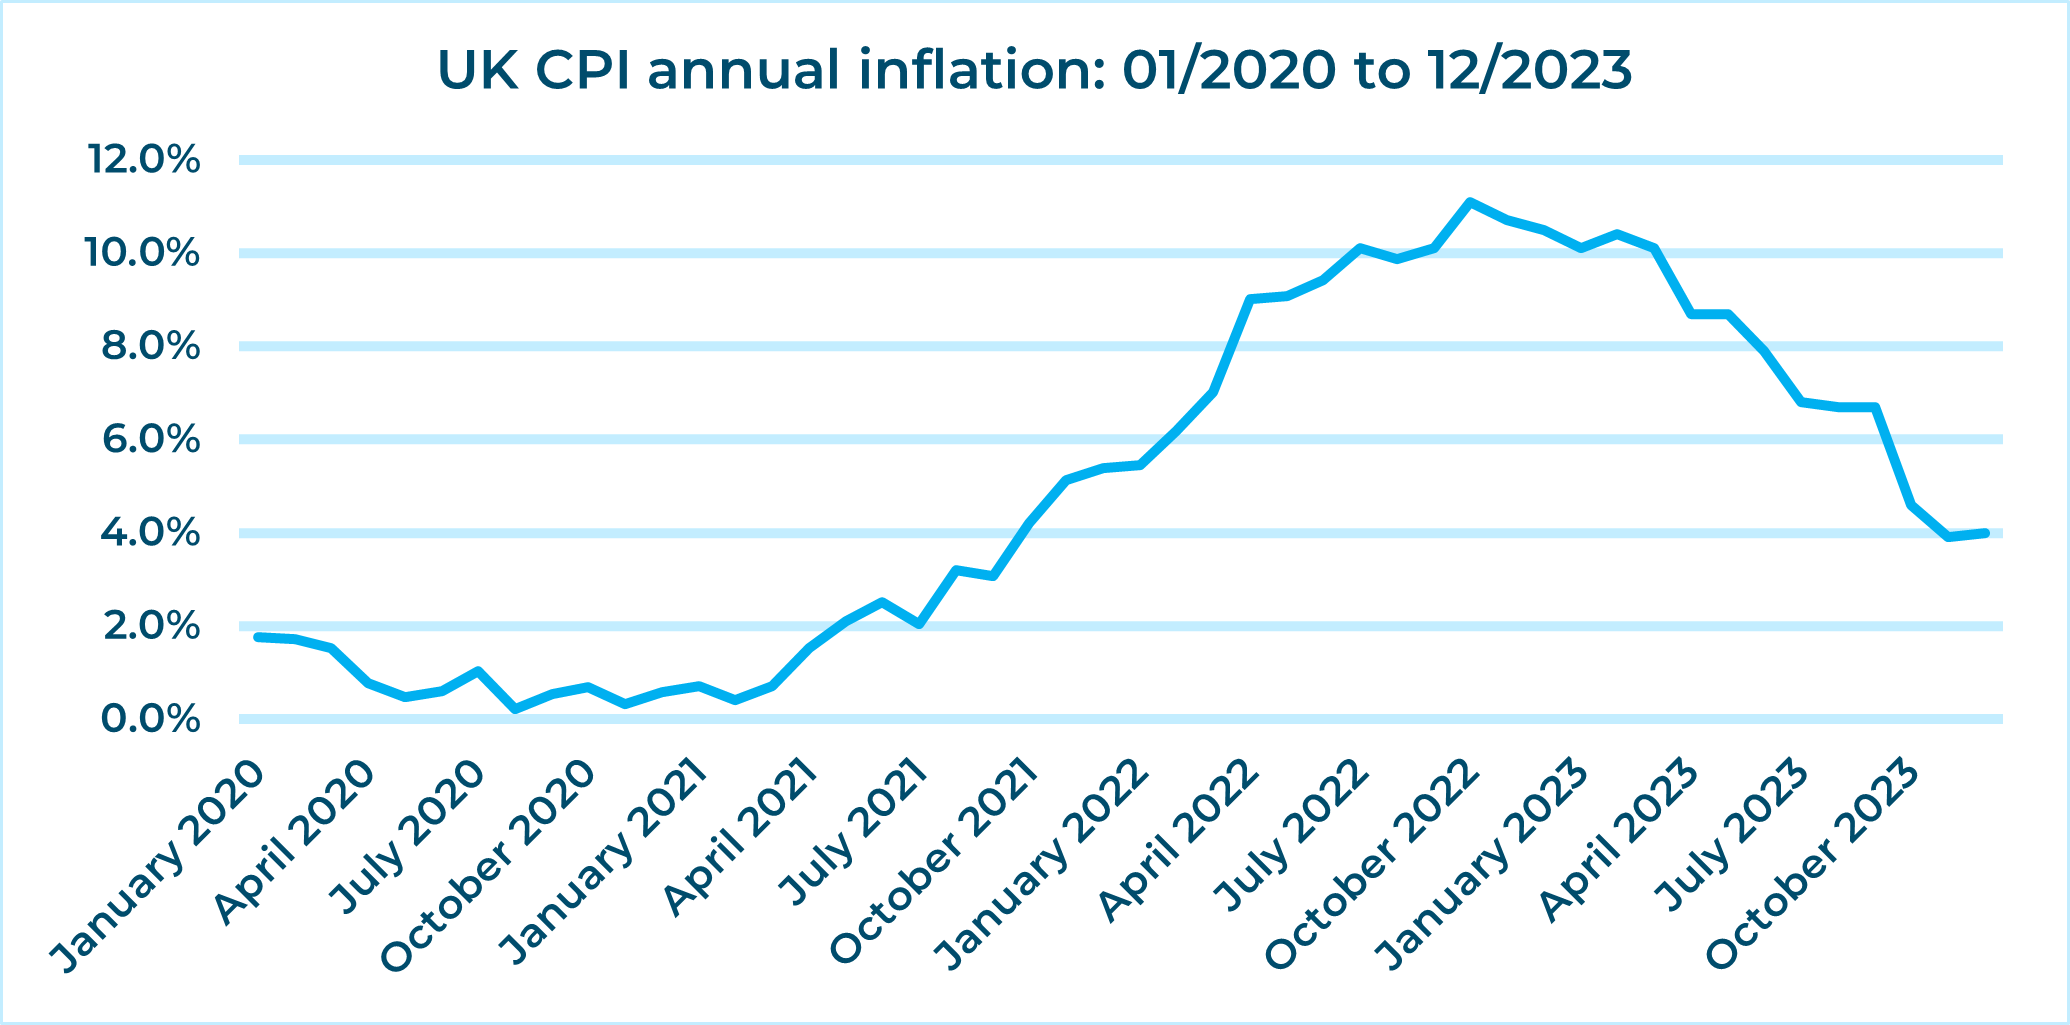 Despite slowing down considerably, inflation has not gone away yet. Source: ONS